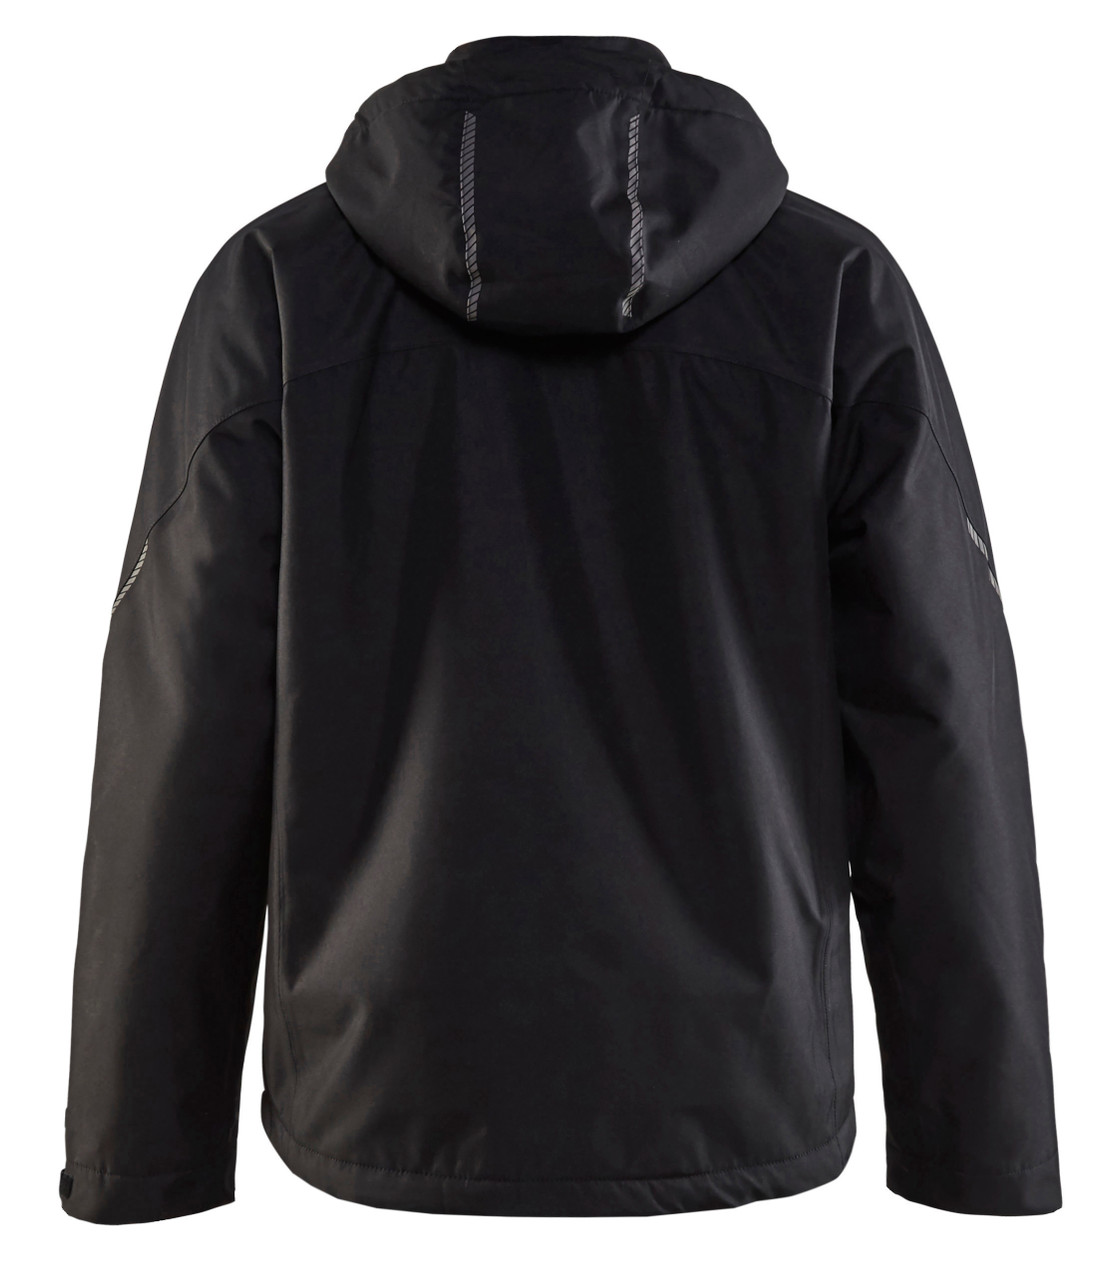 The Blaklader Waterproof Black Jacket for men is a must-have for any outdoor enthusiast. Its sleek design and advanced waterproof technology make it the perfect choice for hiking or any other outdoor activity.